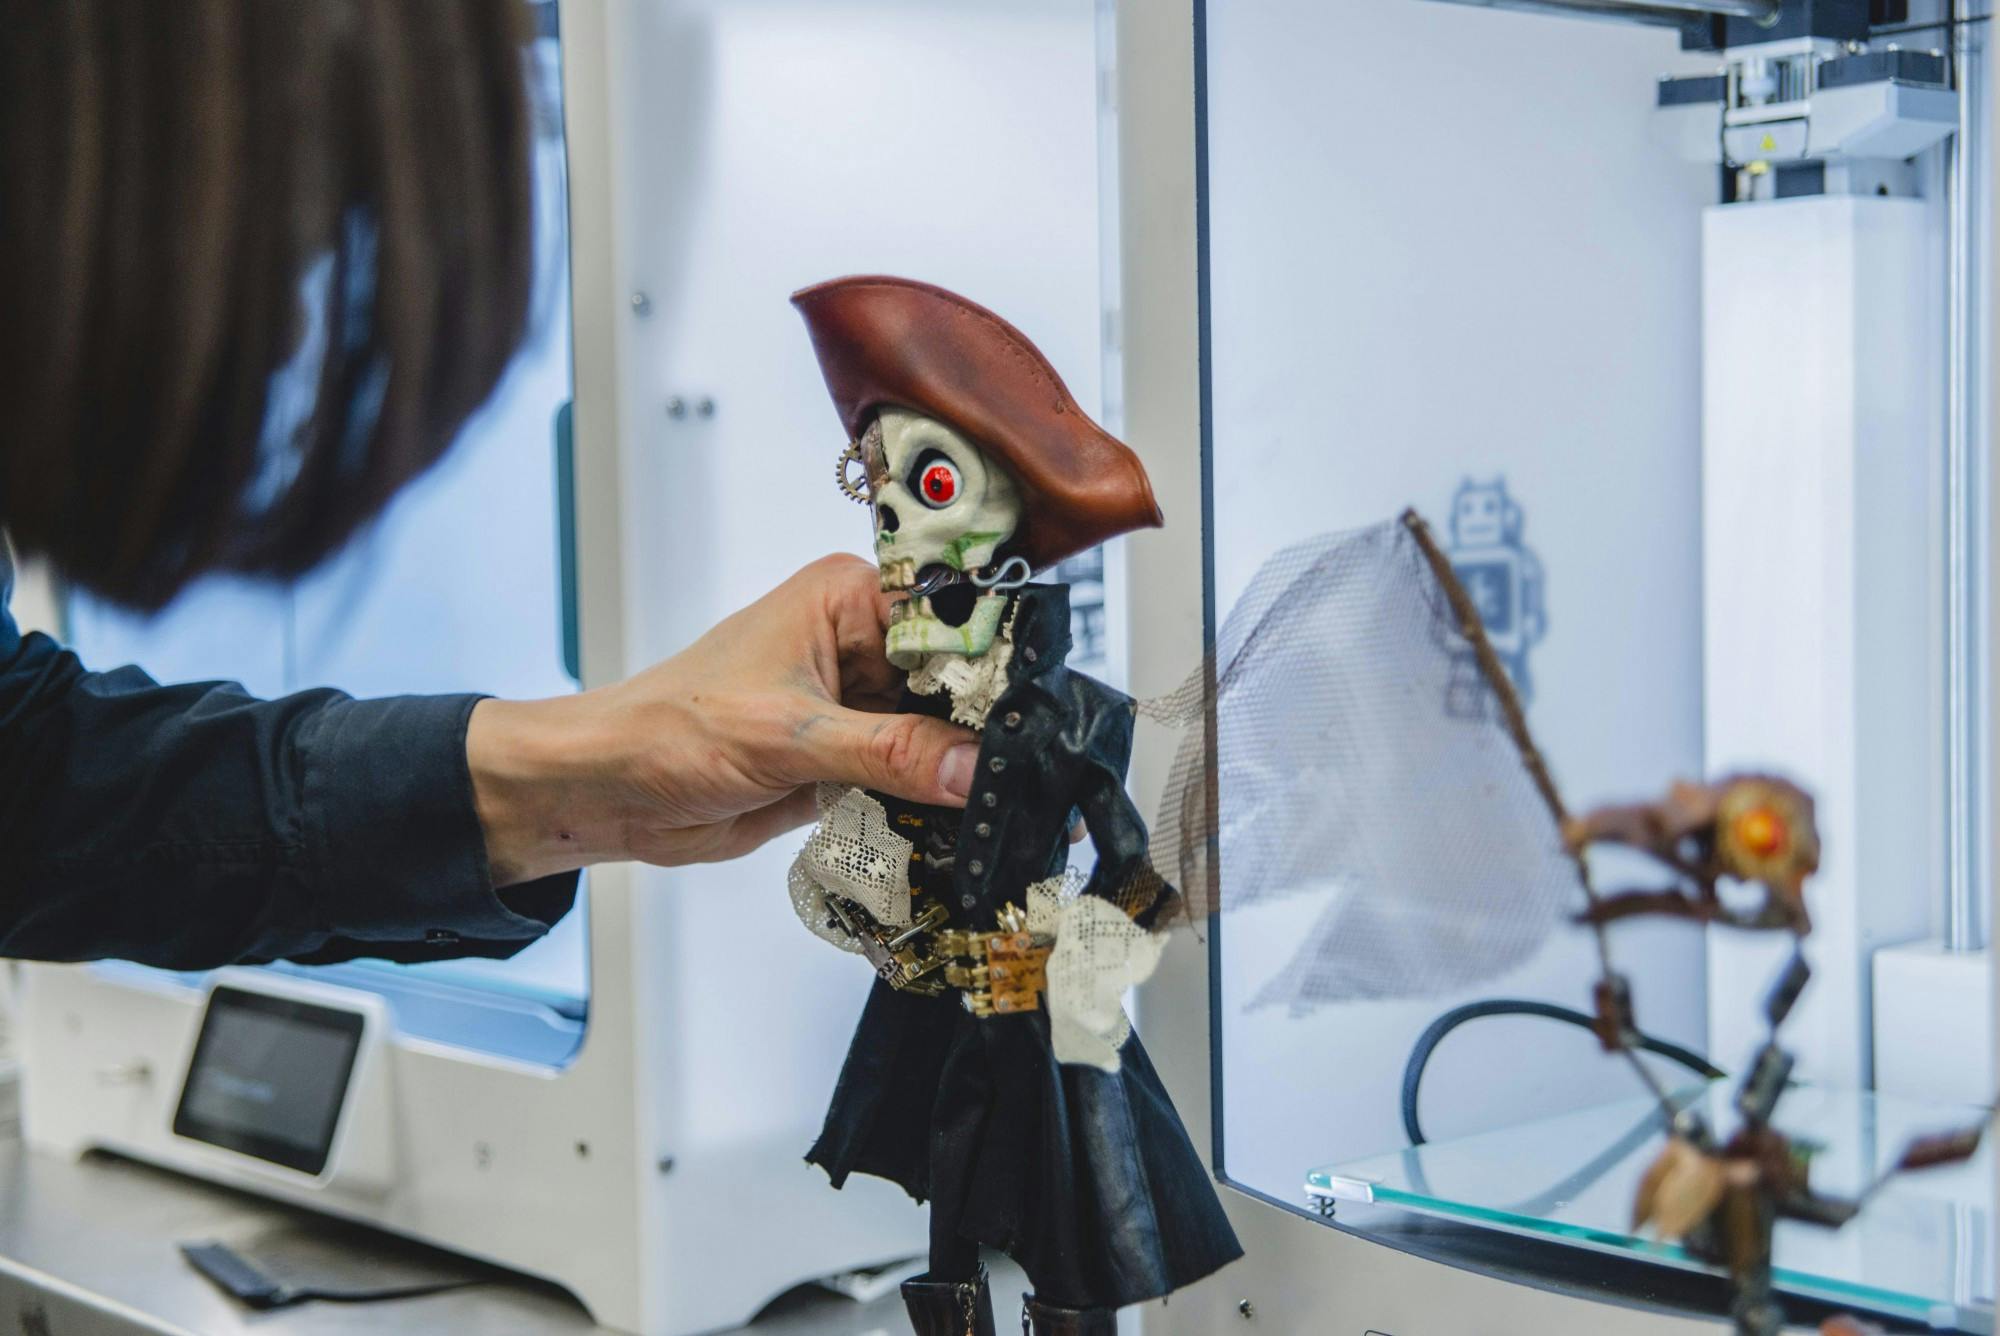 Pirate built using 3 D print technology by Elliot Rowe for BA Hons Animation 1